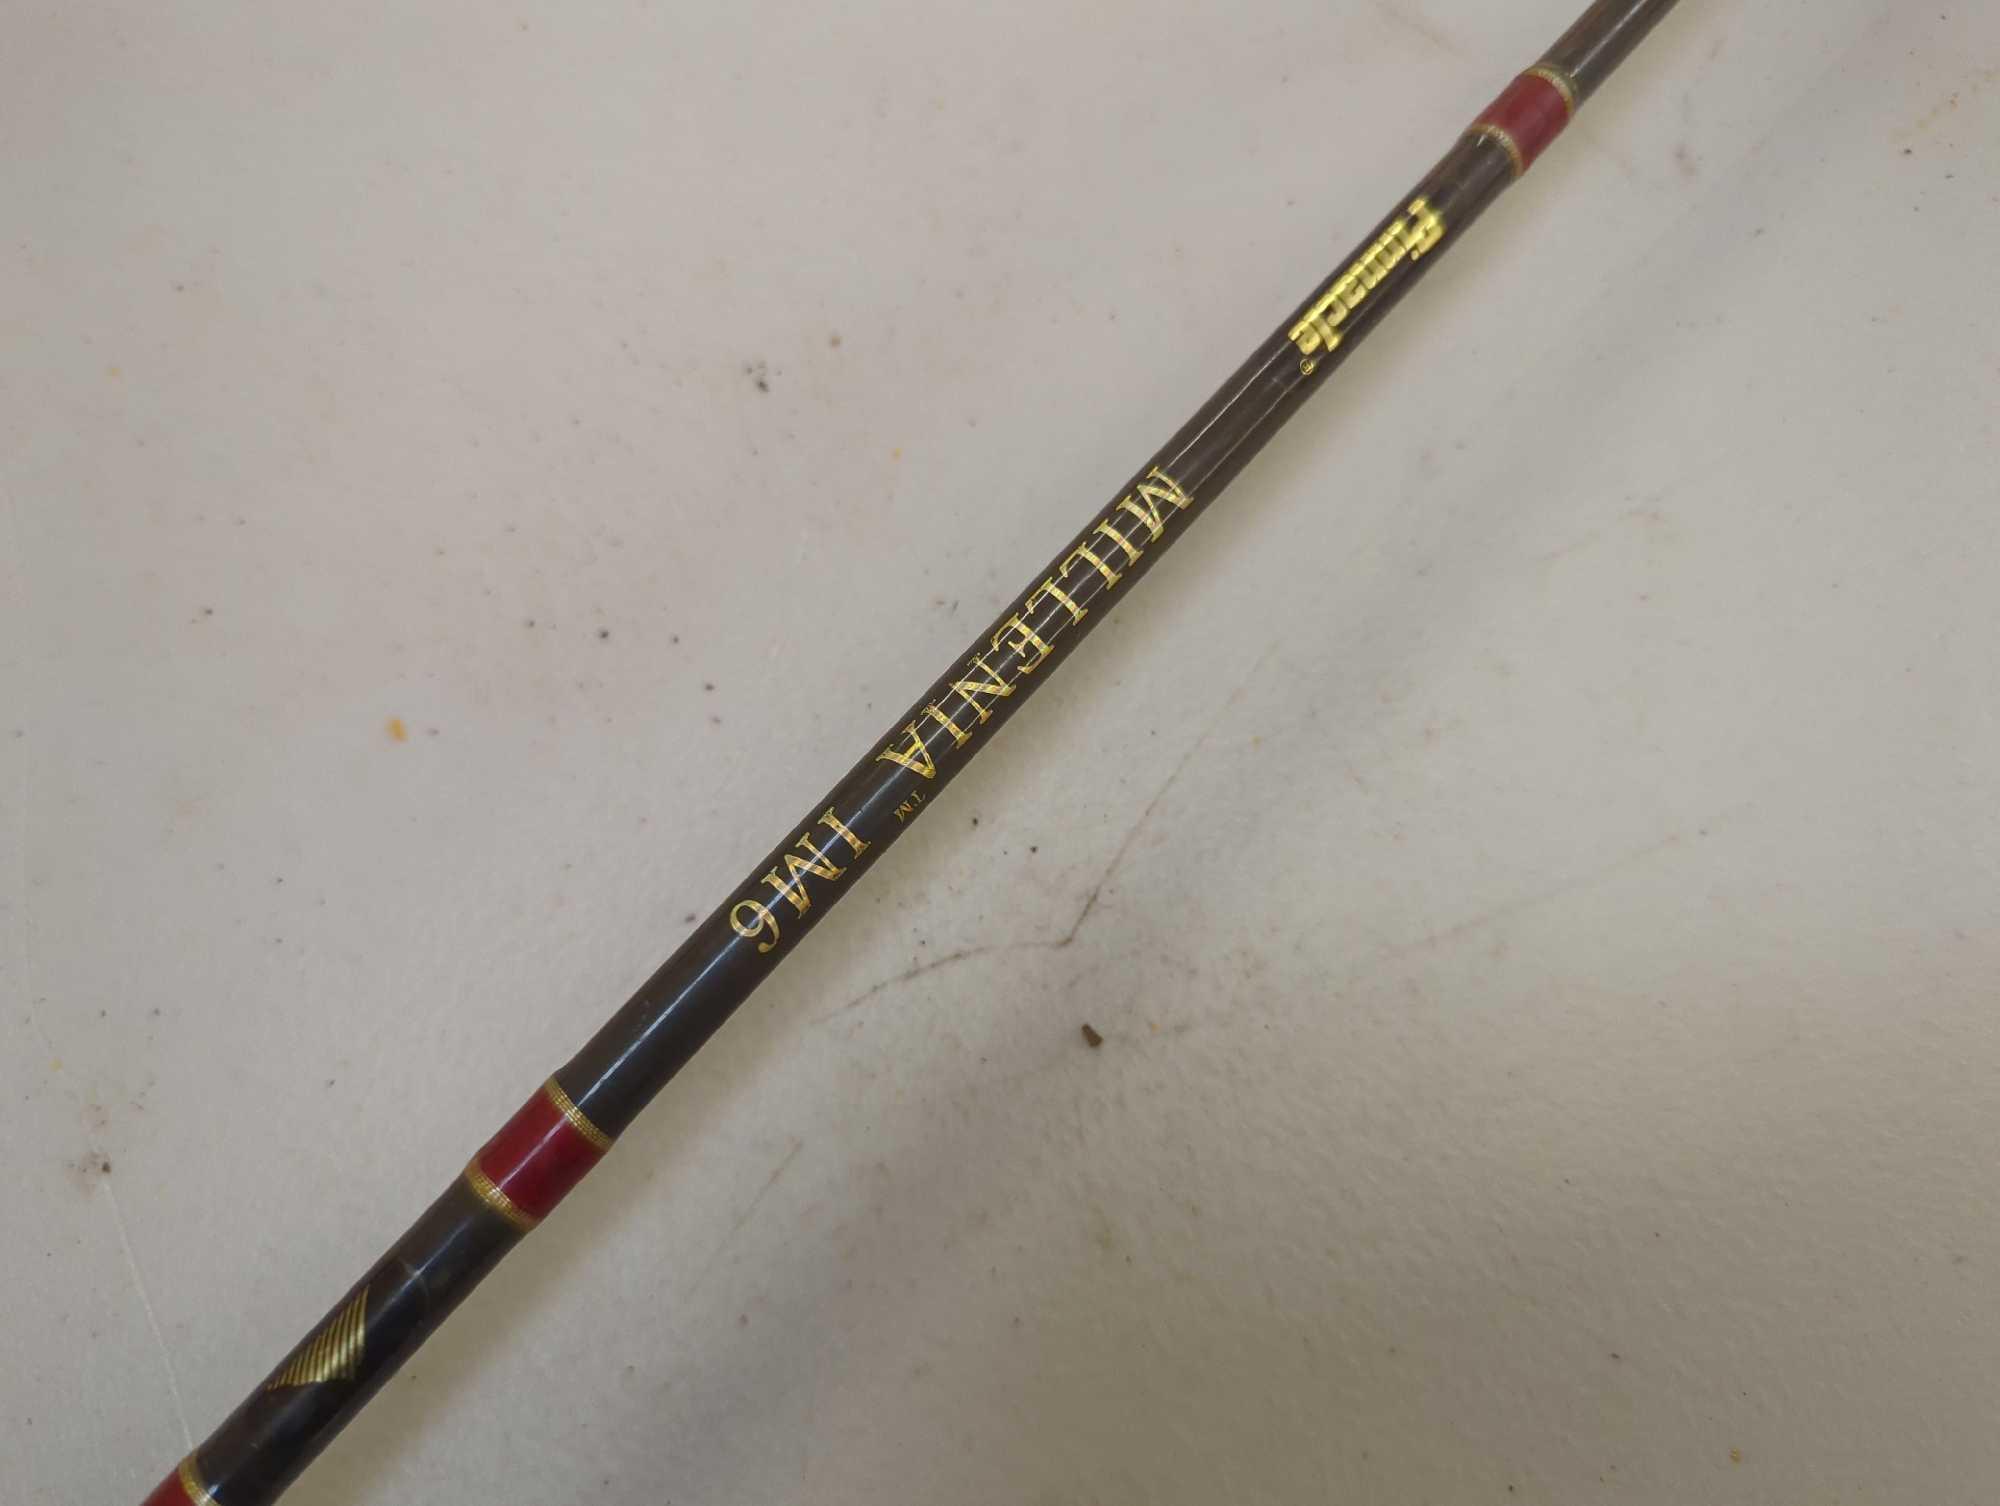 Pinnacle 6'6" millenia fishing rod. Line 10-17 lb Lure 3/16-1 oz Comes as is shown in photos.